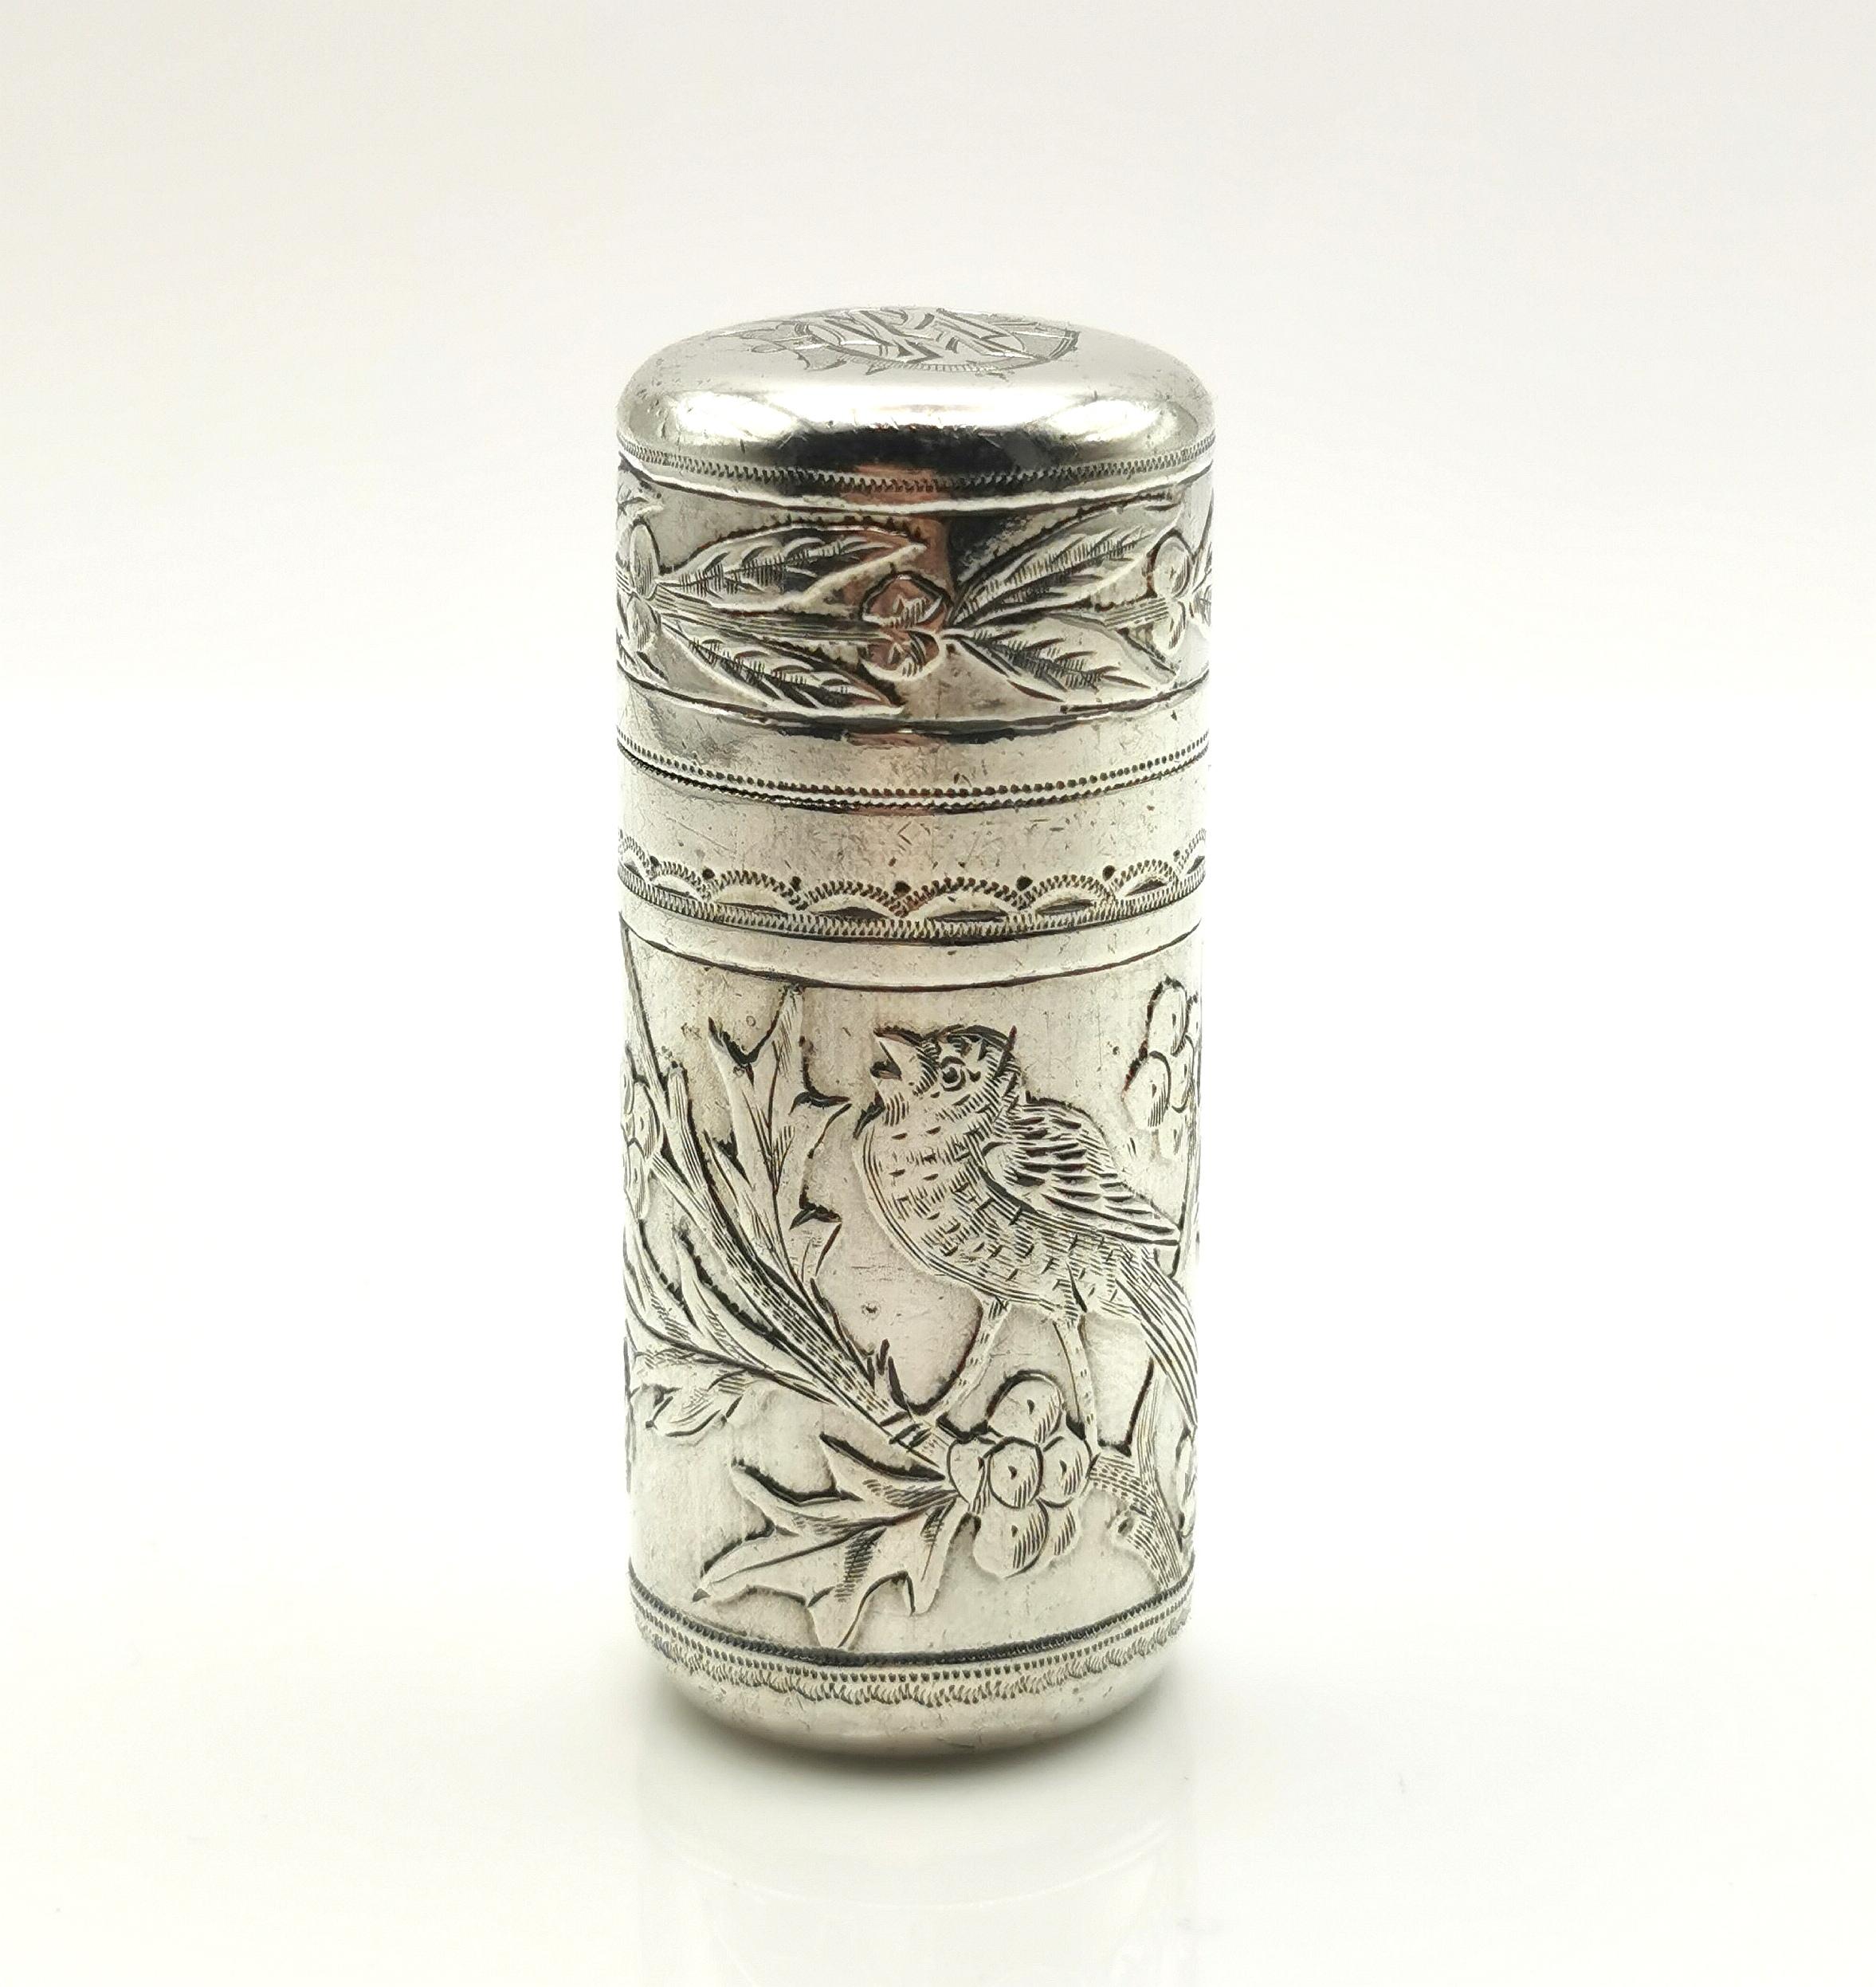 A beautiful antique sterling silver scent bottle.

This is a cylindrical scent bottle made from sterling silver with a glass liner and stopper.

It has the prettiest engraving of birds and Holly with some repousse detailing and a monogram to the lid